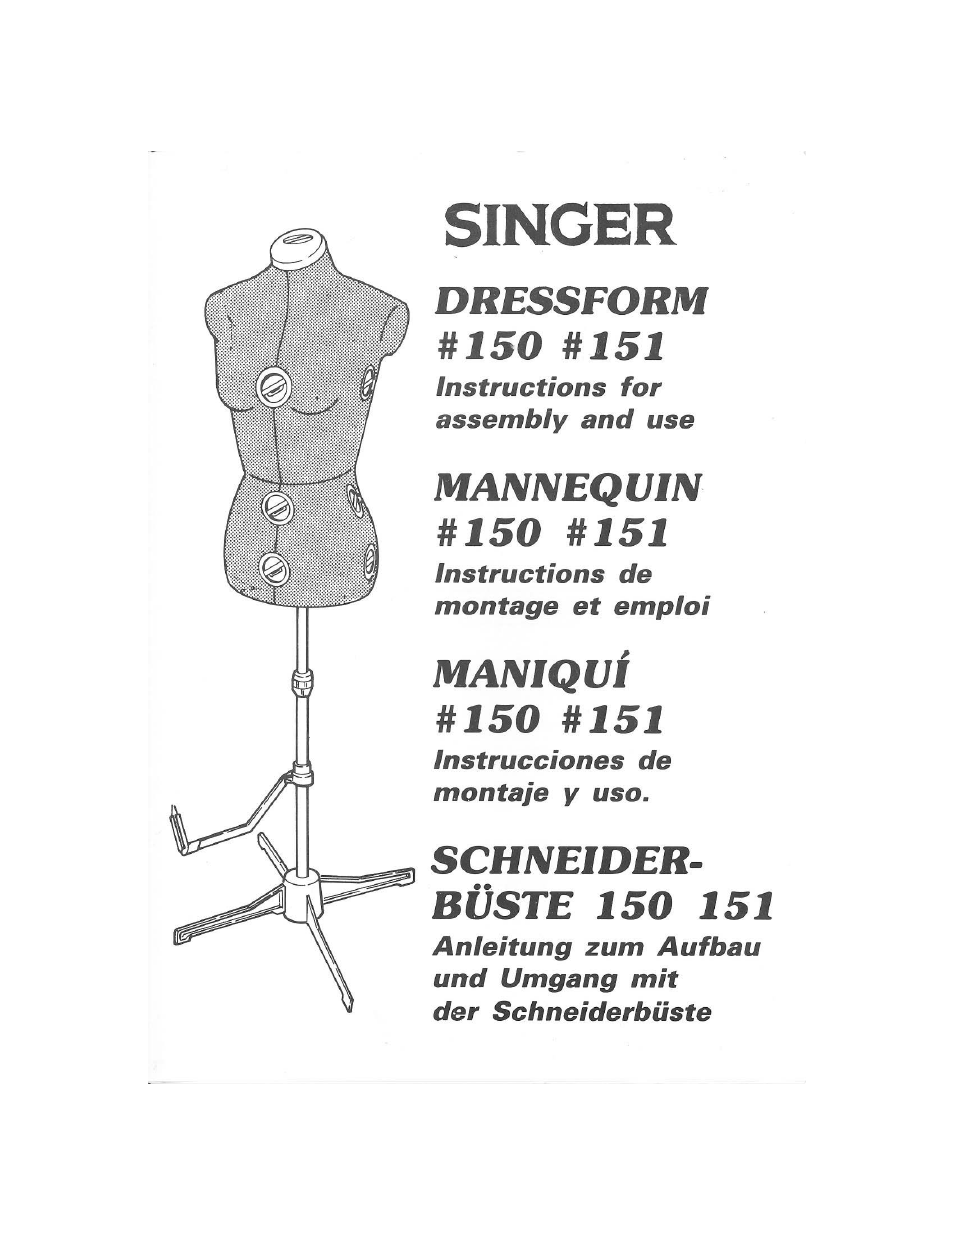 SINGER 151 Dressfrom User Manual | 8 pages